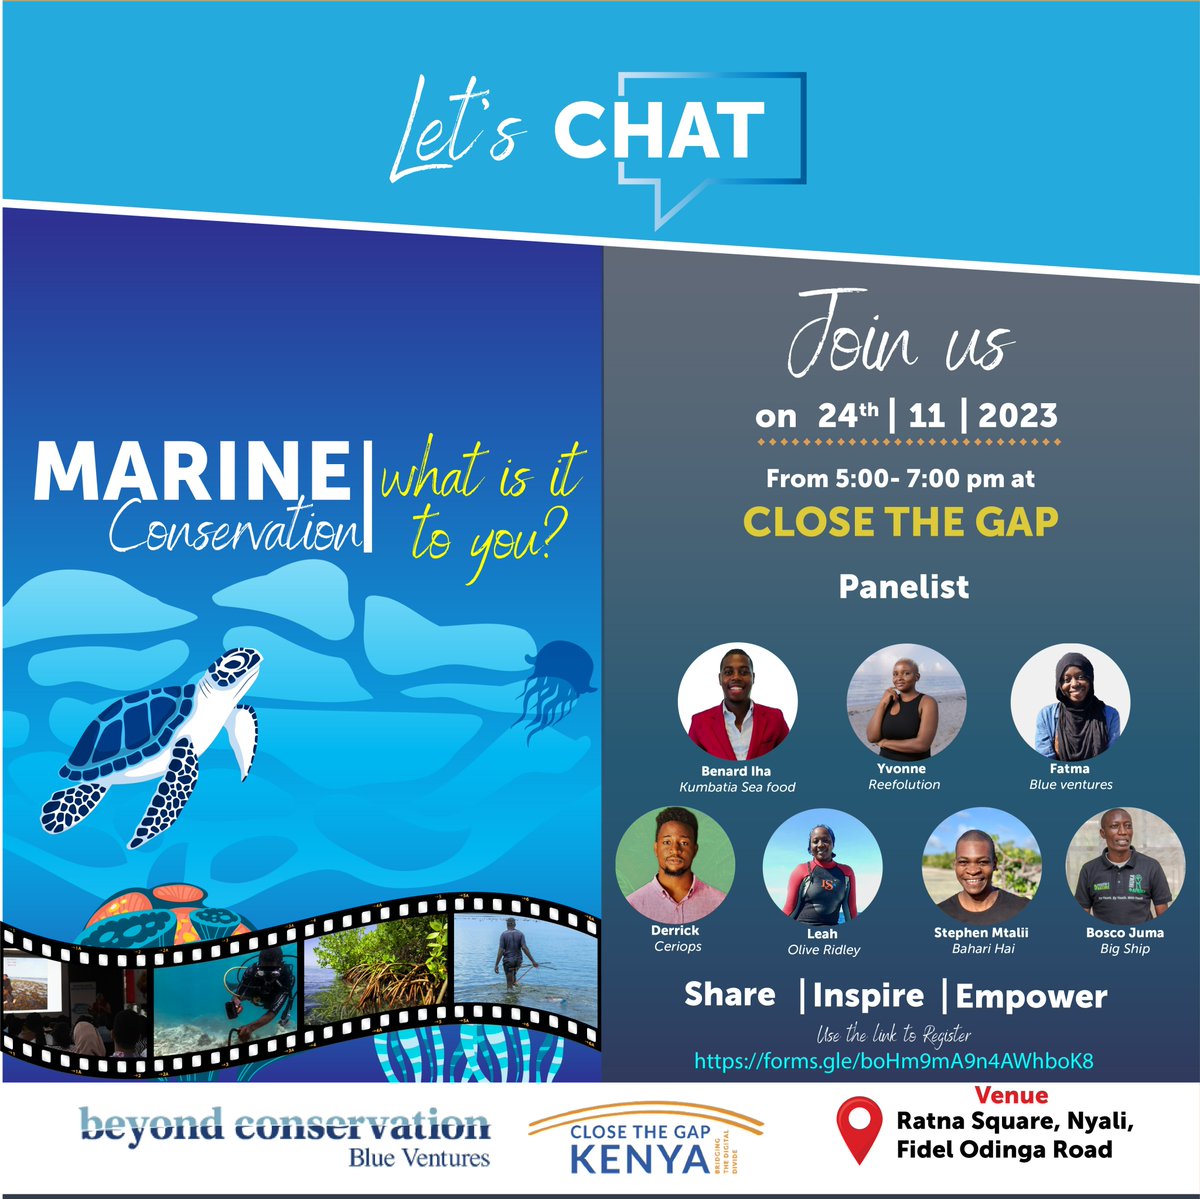 How can young leaders make a difference in #marineconservation ? Join us this Friday at 'Let’s Chat' forum, created by young conservation leaders for young conservation leaders to network and discuss innovative ideas fit for the changing times and pressures the environment faces